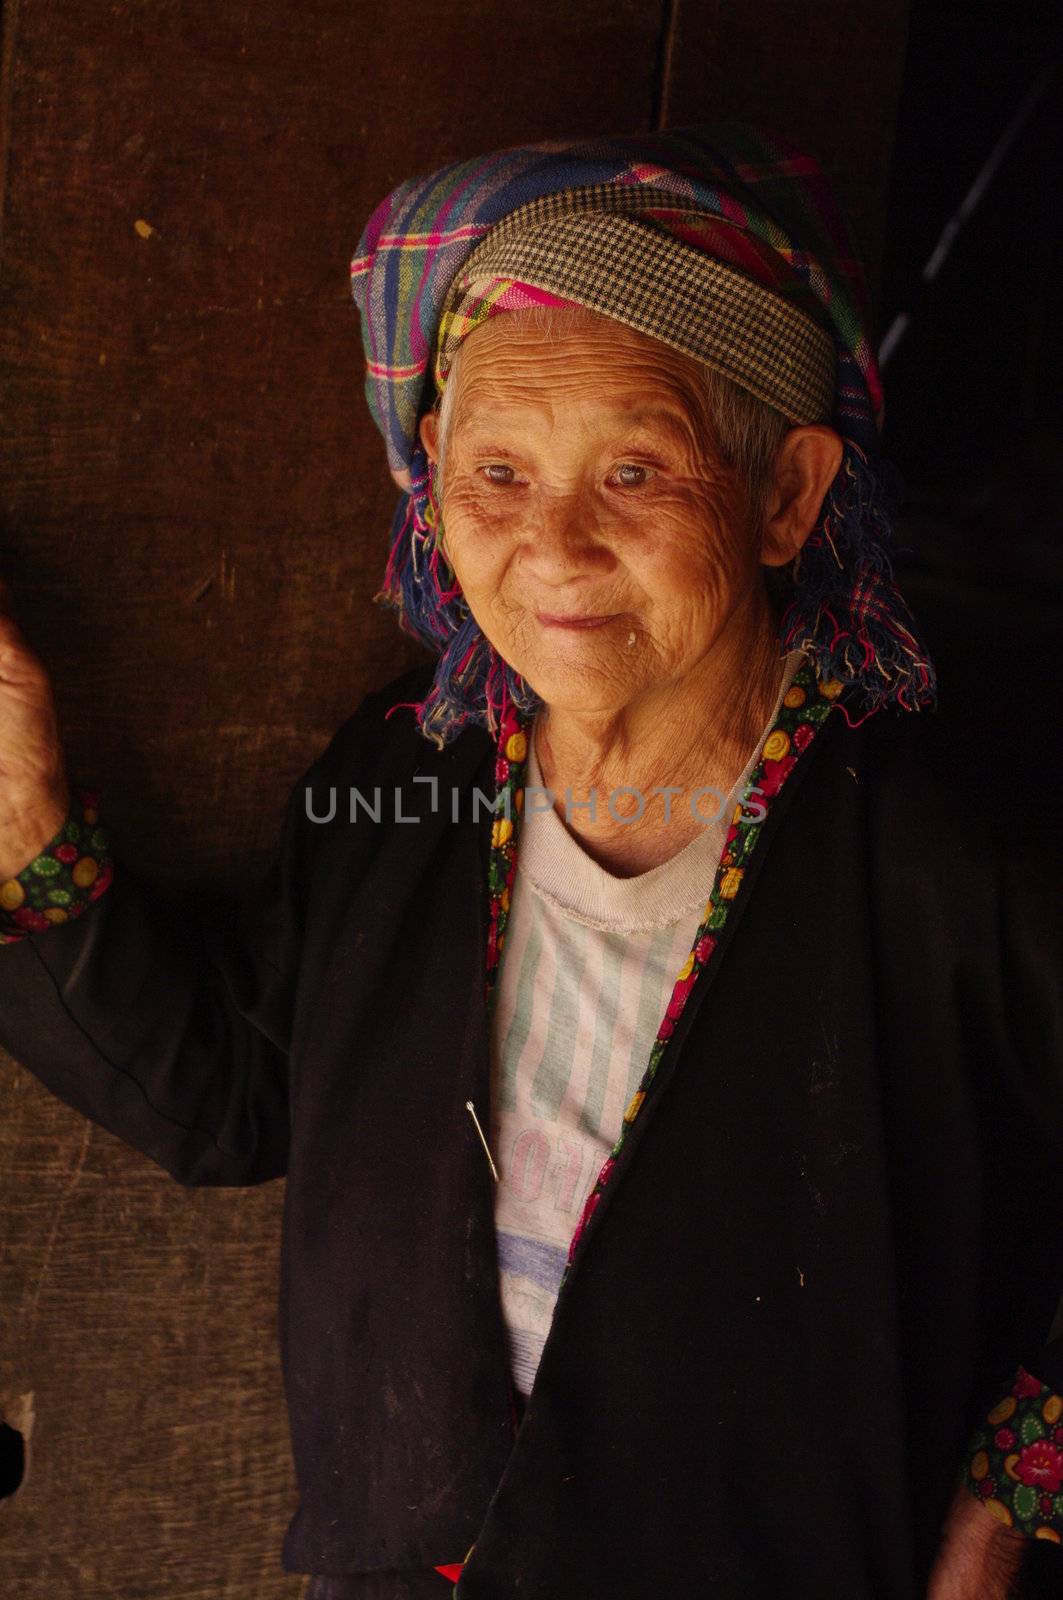 Flowered Hmong grandmother by Duroc